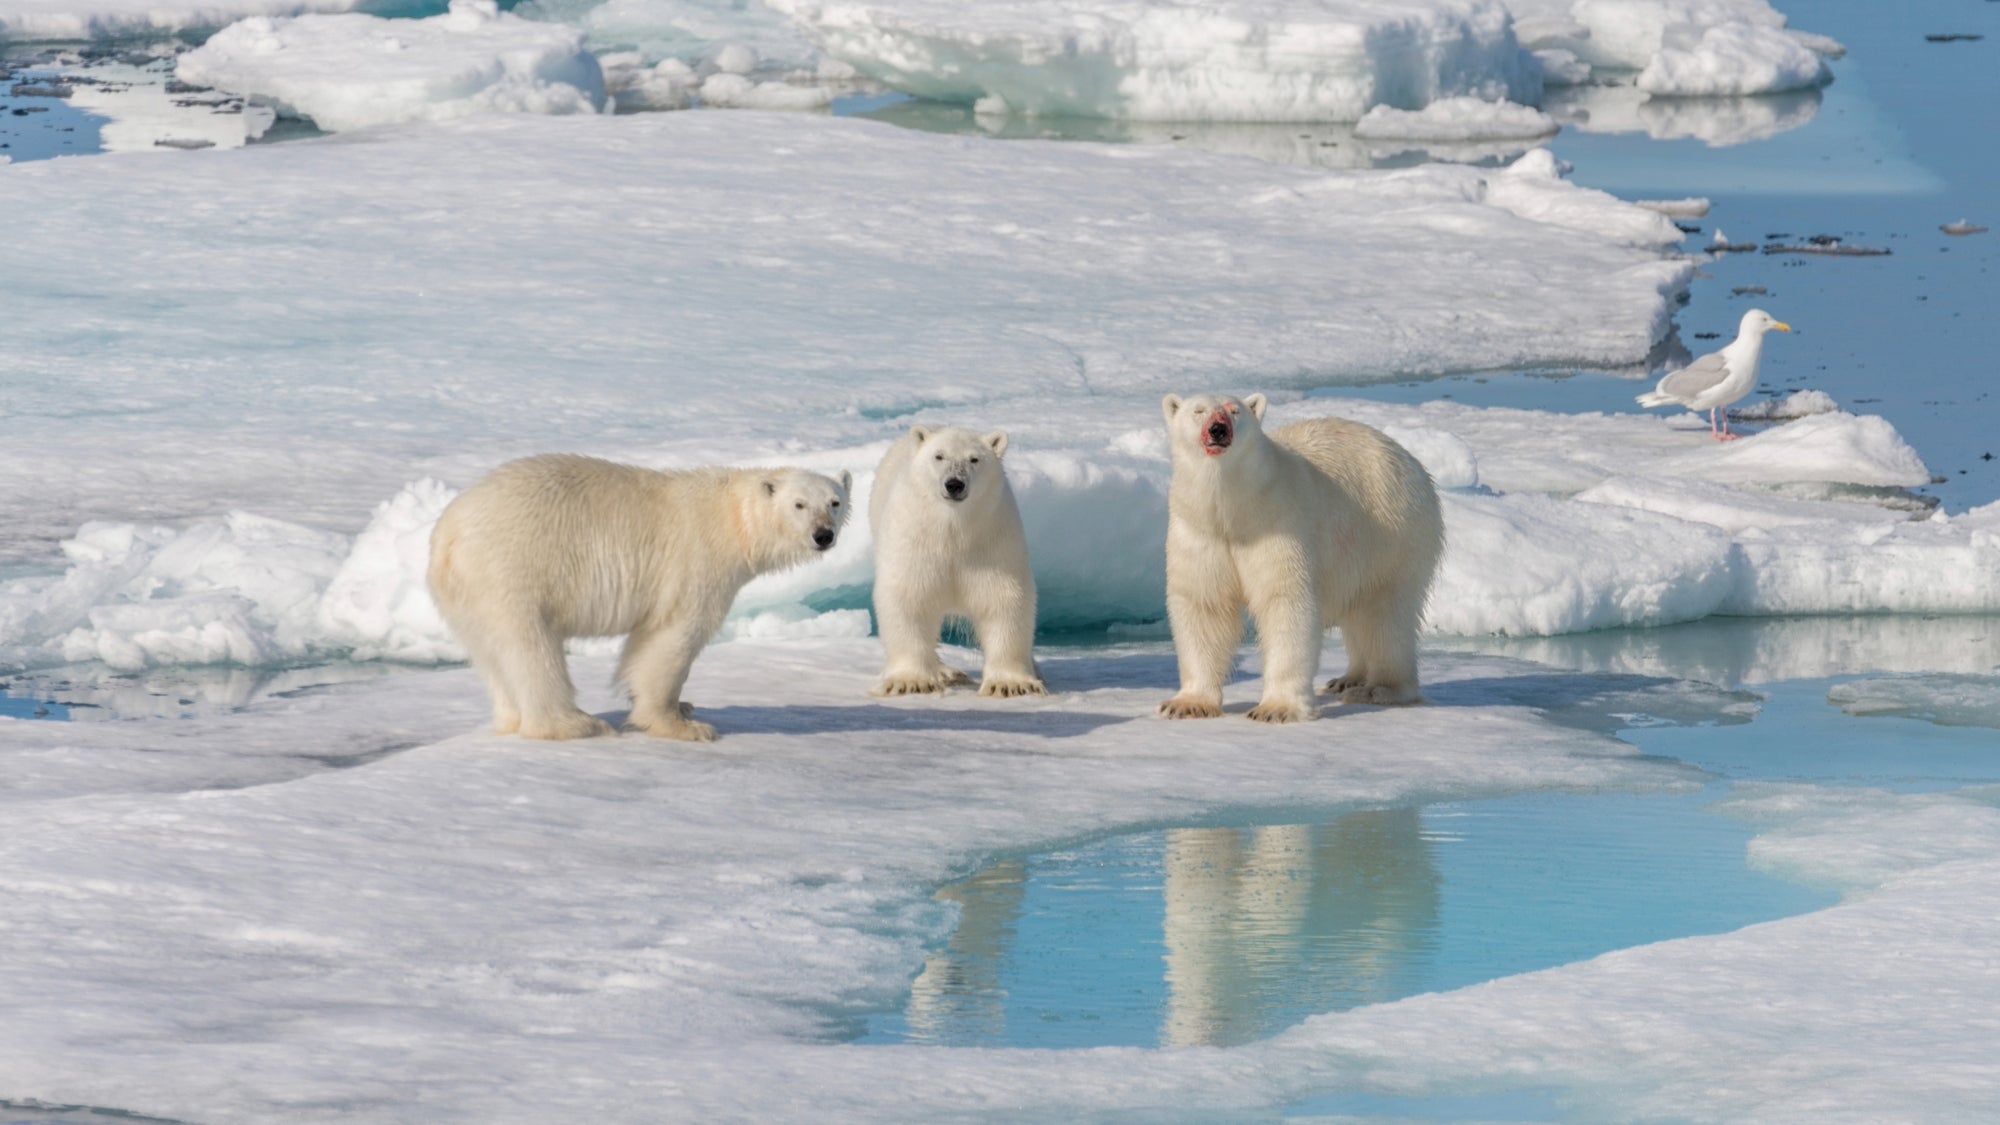 Polar bear decline is directly linked to greenhouse gas emissions